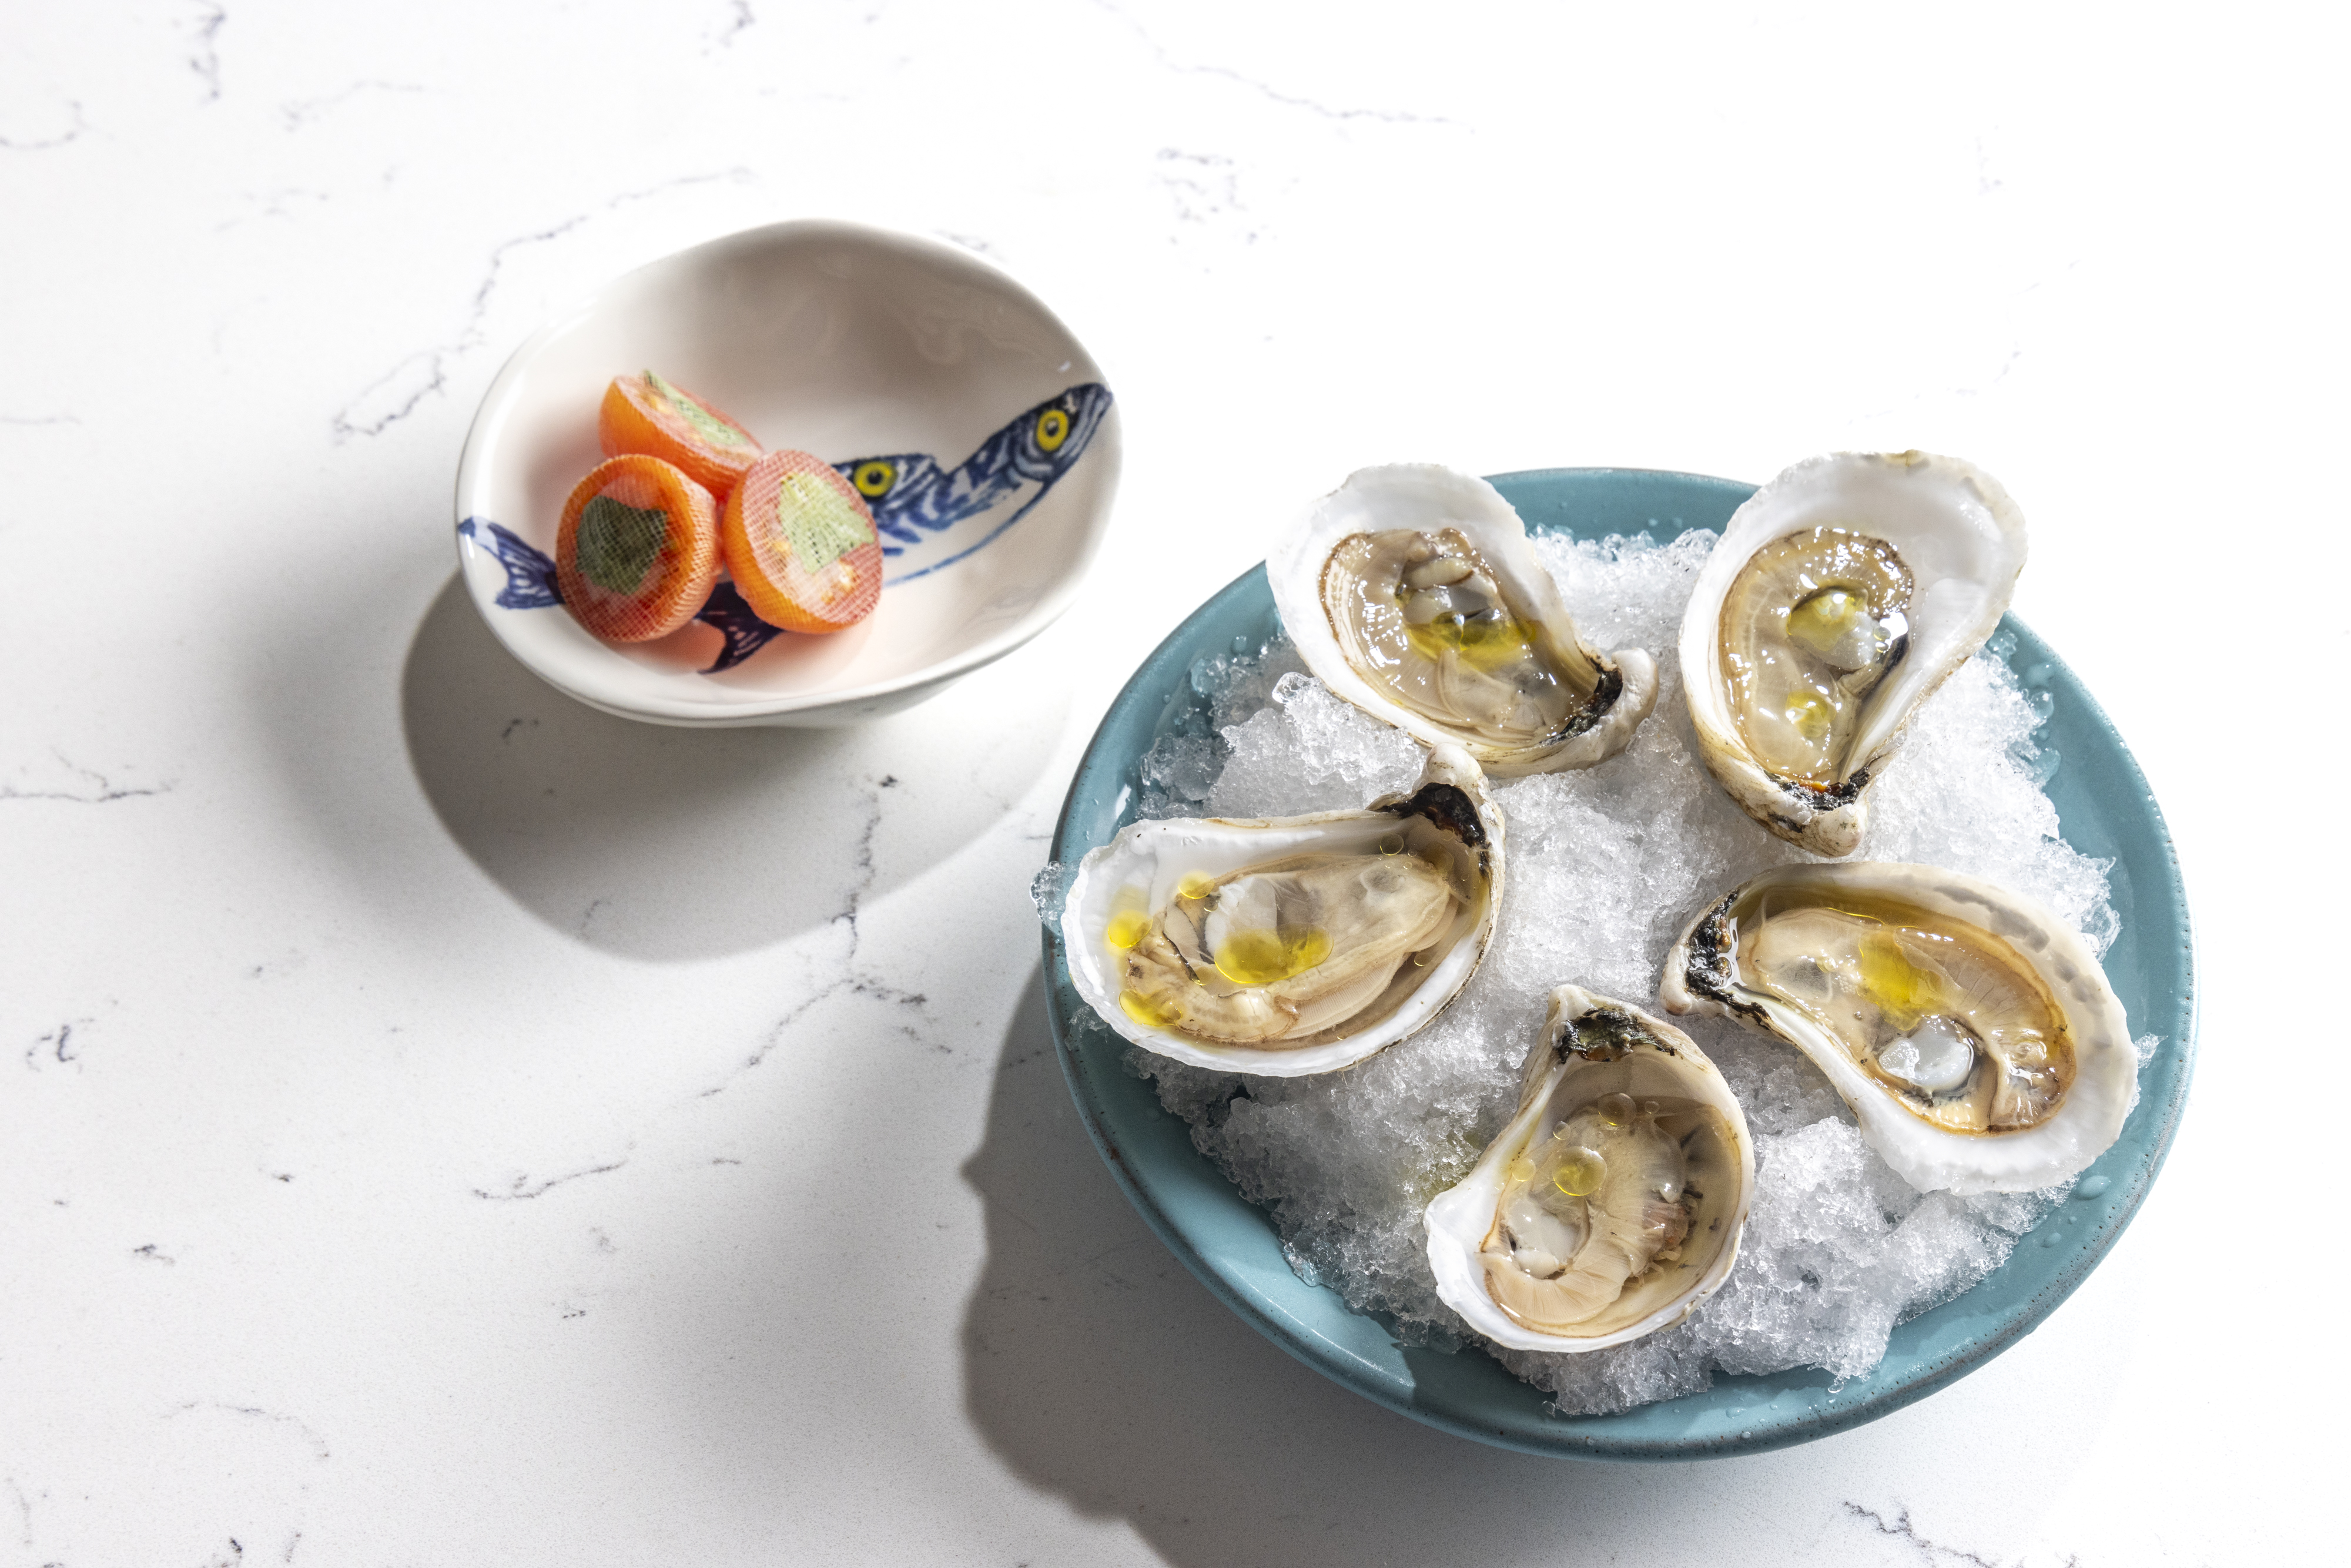 Five half-shell oysters on ice, next to a bowl of tomatoes.&nbsp;